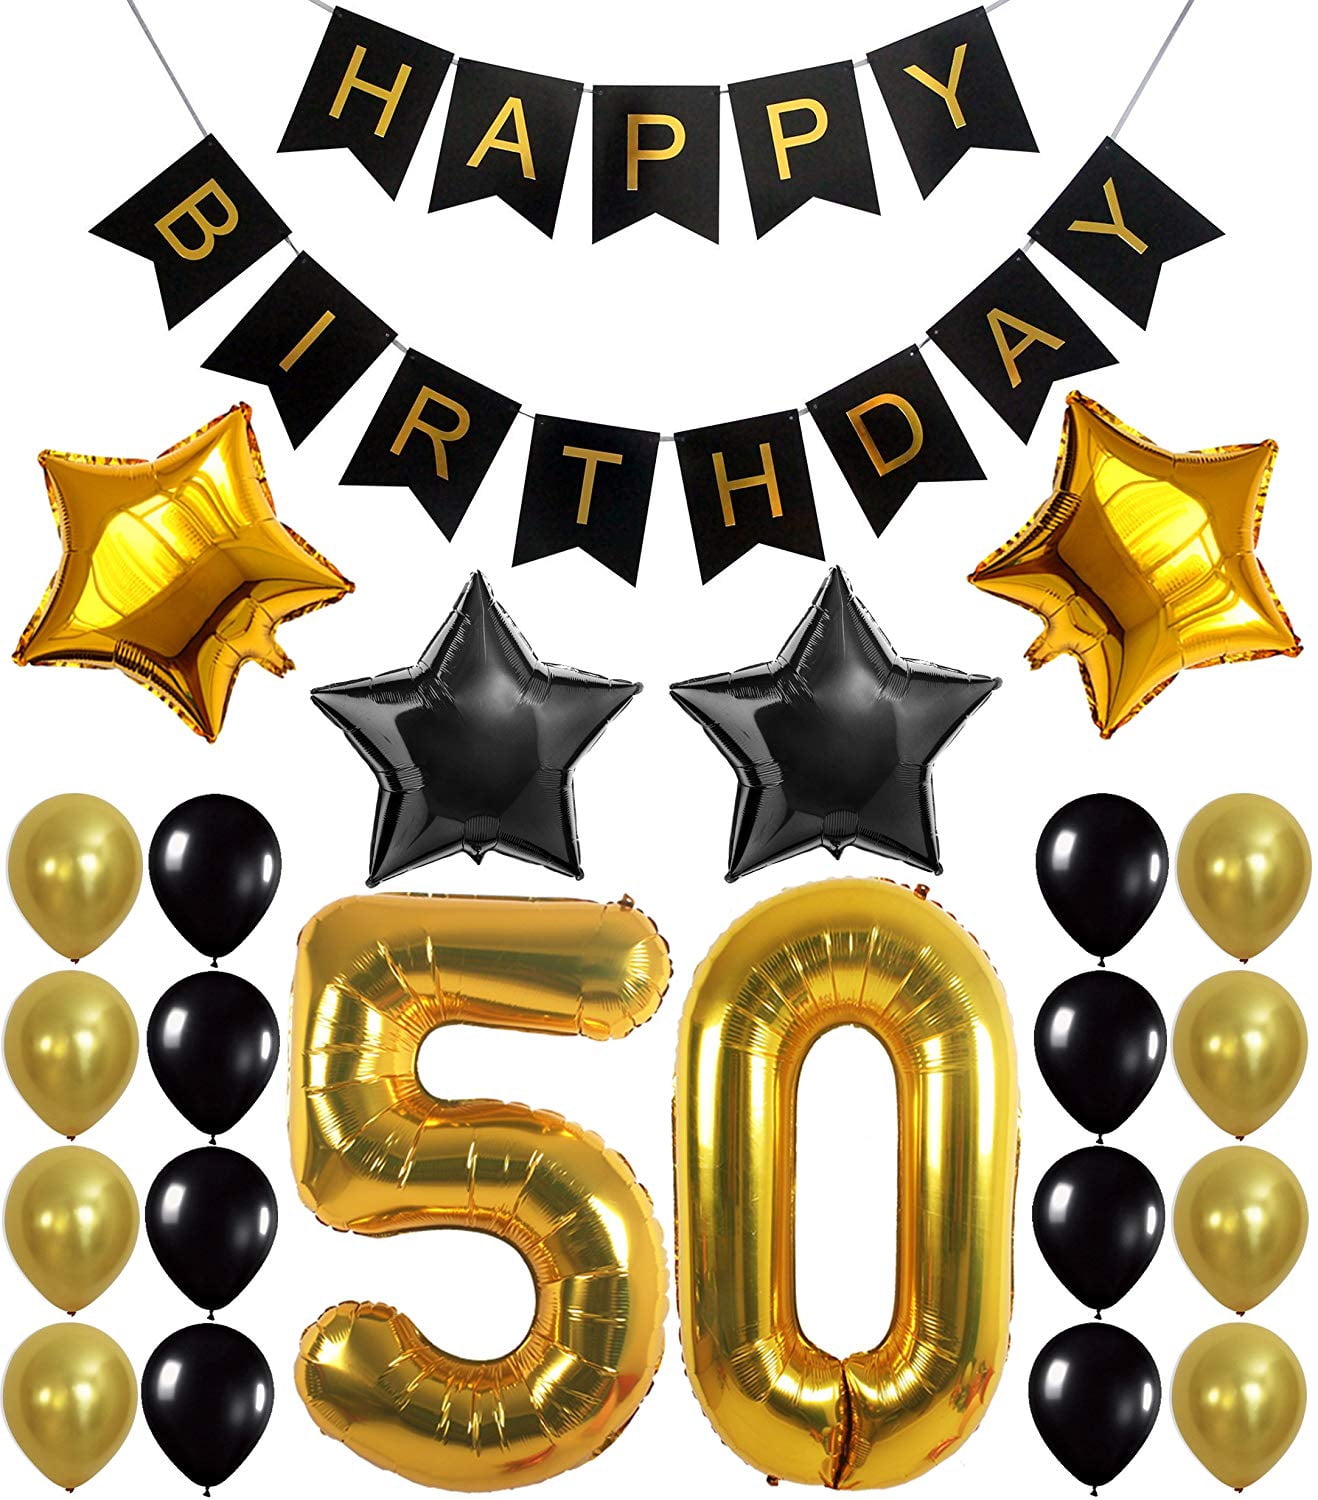 Yoart 50th Birthday Decorations Black Gold Balloons for Man Cheers to 50 Years Banner with Slide Hanging Swirls Number Print and Confetti Party Balloons